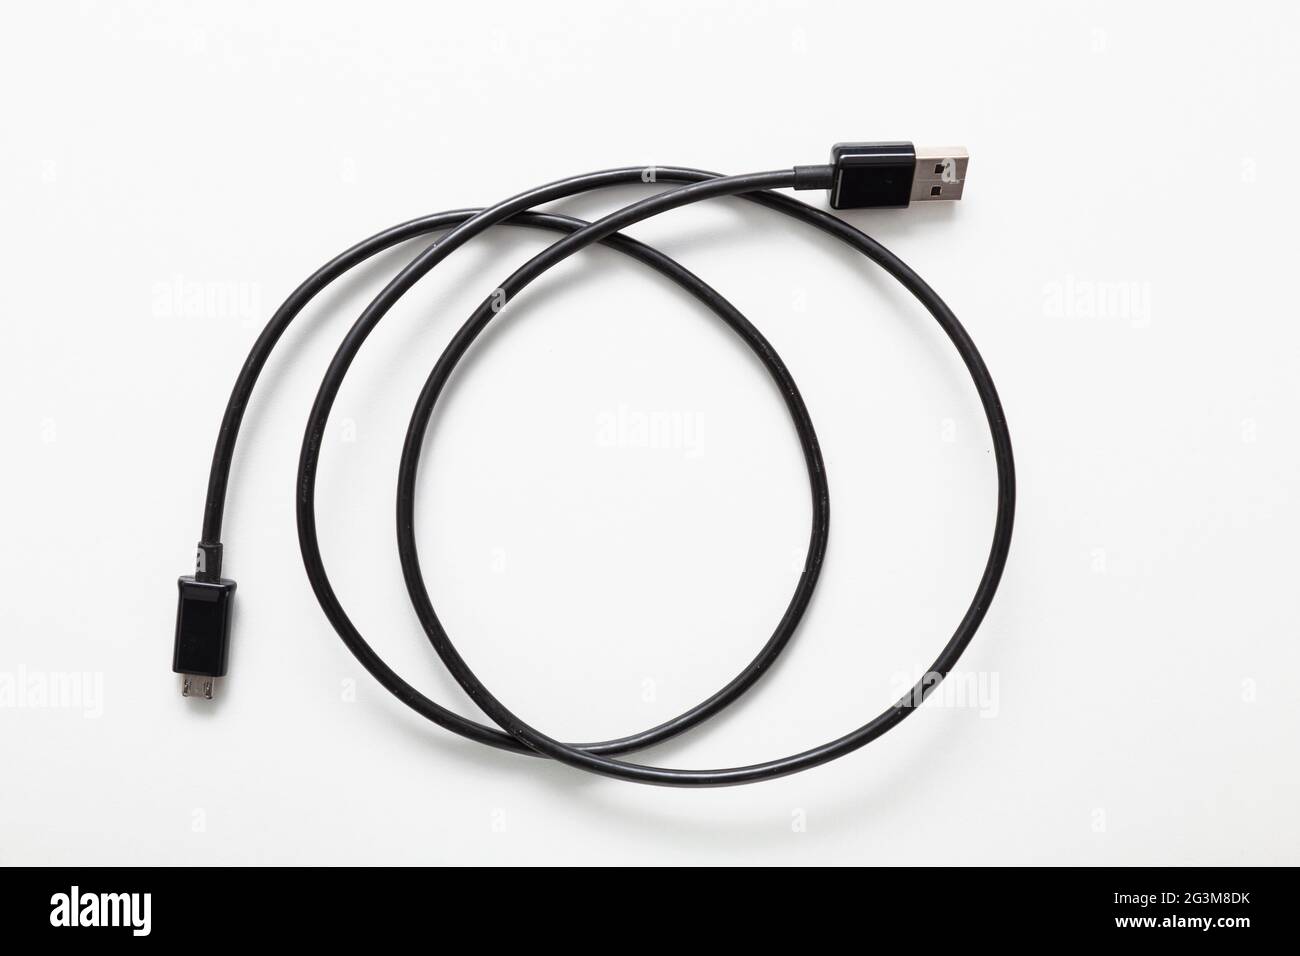 Coiled black cable with USB and micro USB connectors isolated on a white background. Stock Photo